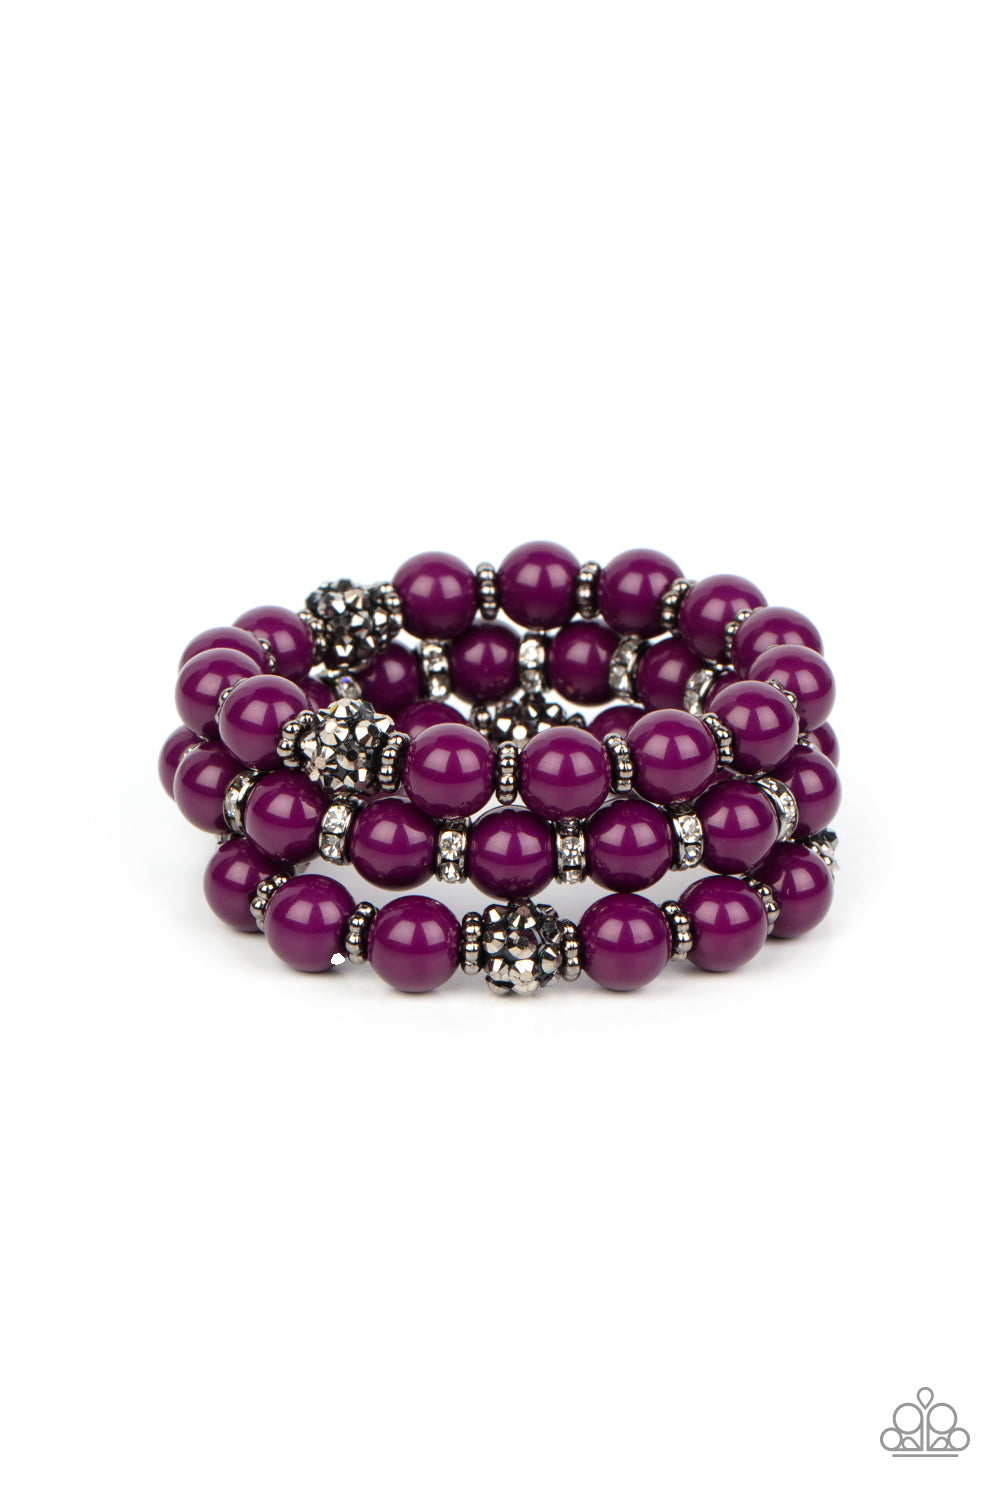 Paparazzi Accessories Poshly Packing - Purple Stretchy Bracelets a posh collection of polished purple beads, studded gunmetal rings, white rhinestone encrusted rings, and hematite dotted beads are threaded along stretchy bands around the wrist, creating sassy layers.  Featured inside The Preview at GLOW!  Sold as one set of three bracelets.